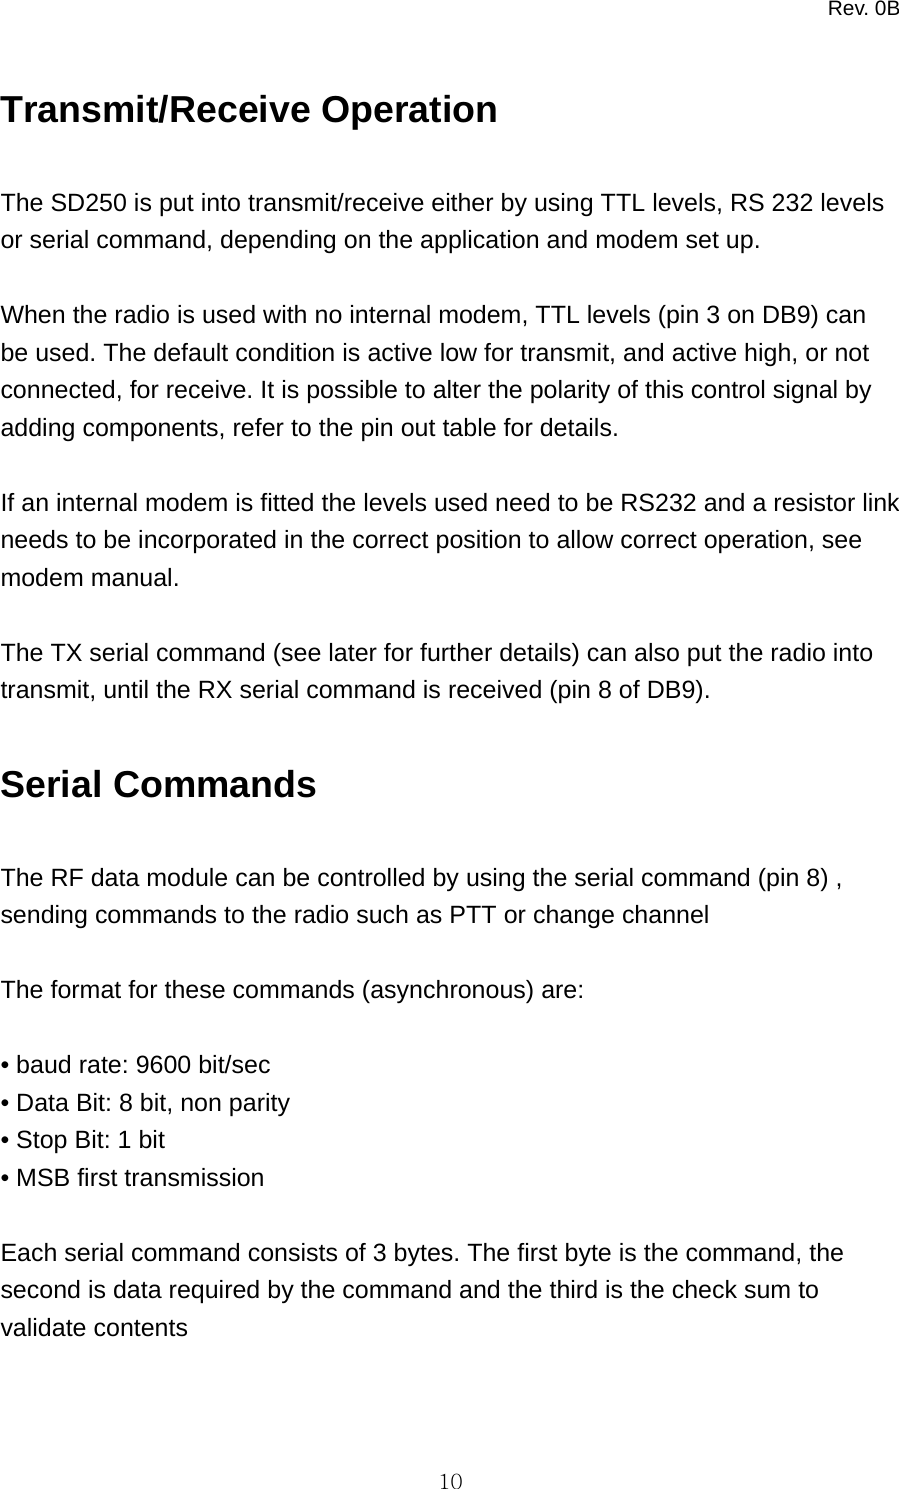 Rev. 0B   10Transmit/Receive Operation  The SD250 is put into transmit/receive either by using TTL levels, RS 232 levels or serial command, depending on the application and modem set up.  When the radio is used with no internal modem, TTL levels (pin 3 on DB9) can be used. The default condition is active low for transmit, and active high, or not connected, for receive. It is possible to alter the polarity of this control signal by adding components, refer to the pin out table for details.  If an internal modem is fitted the levels used need to be RS232 and a resistor link needs to be incorporated in the correct position to allow correct operation, see modem manual.  The TX serial command (see later for further details) can also put the radio into transmit, until the RX serial command is received (pin 8 of DB9).  Serial Commands  The RF data module can be controlled by using the serial command (pin 8) , sending commands to the radio such as PTT or change channel  The format for these commands (asynchronous) are:  • baud rate: 9600 bit/sec • Data Bit: 8 bit, non parity • Stop Bit: 1 bit • MSB first transmission  Each serial command consists of 3 bytes. The first byte is the command, the second is data required by the command and the third is the check sum to validate contents   